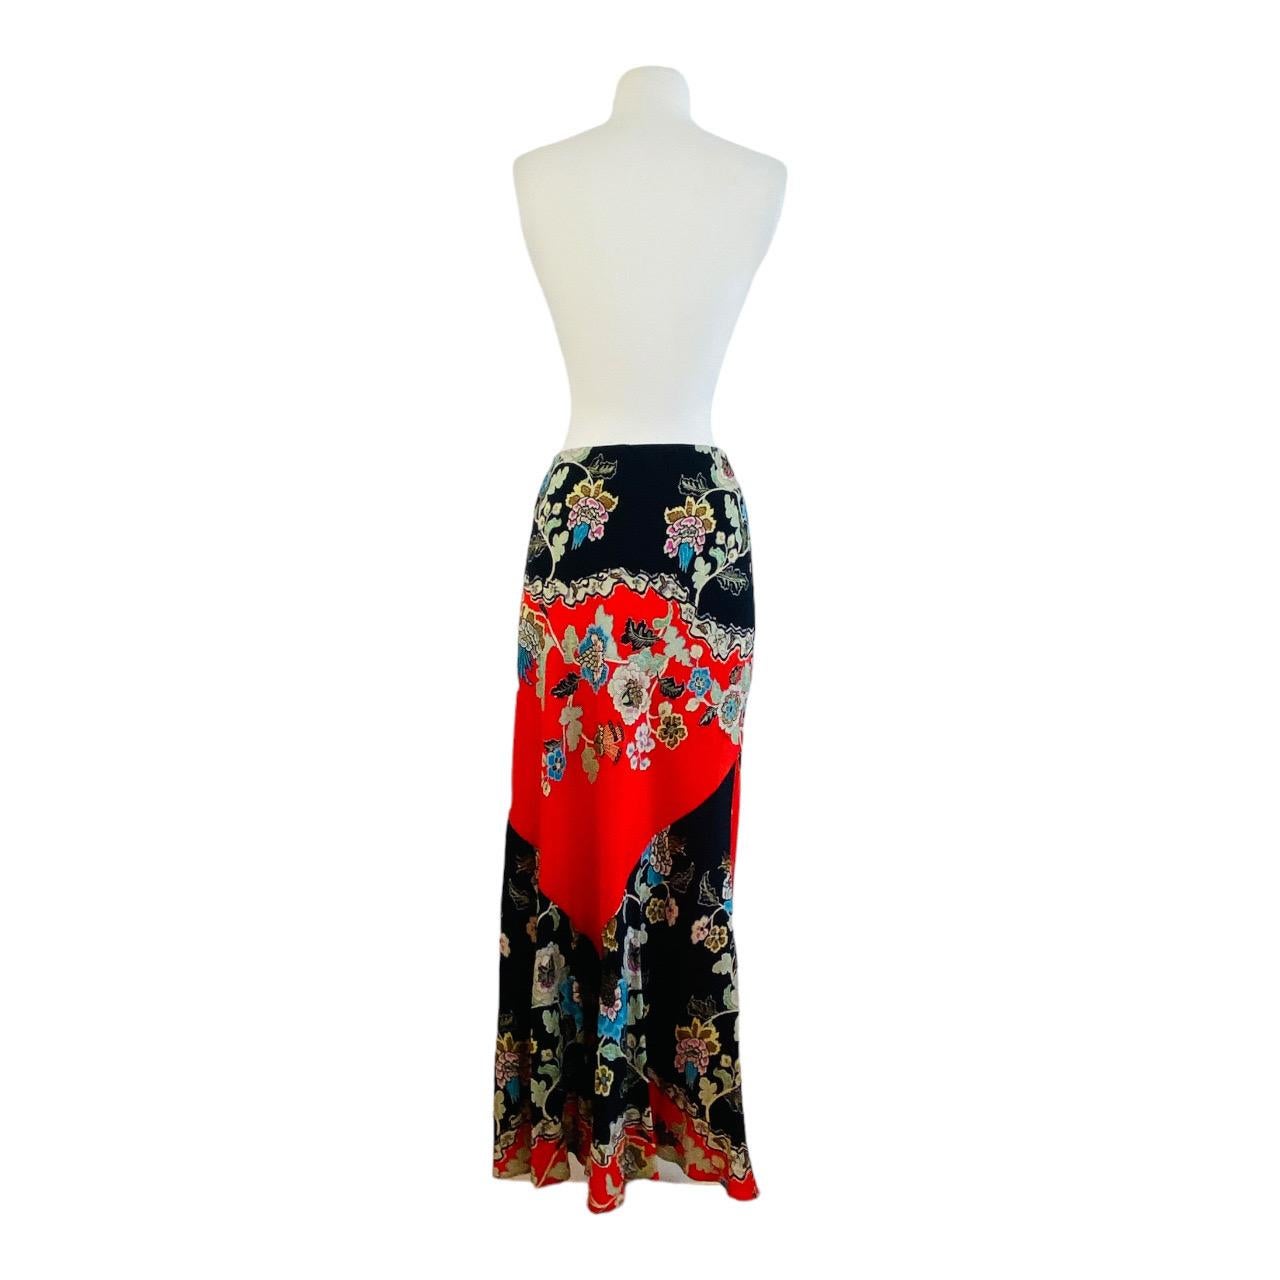 Vintage Roberto Cavalli S/S 2003 Chinoiserie Black + Red Floral Maxi Skirt For Sale 2